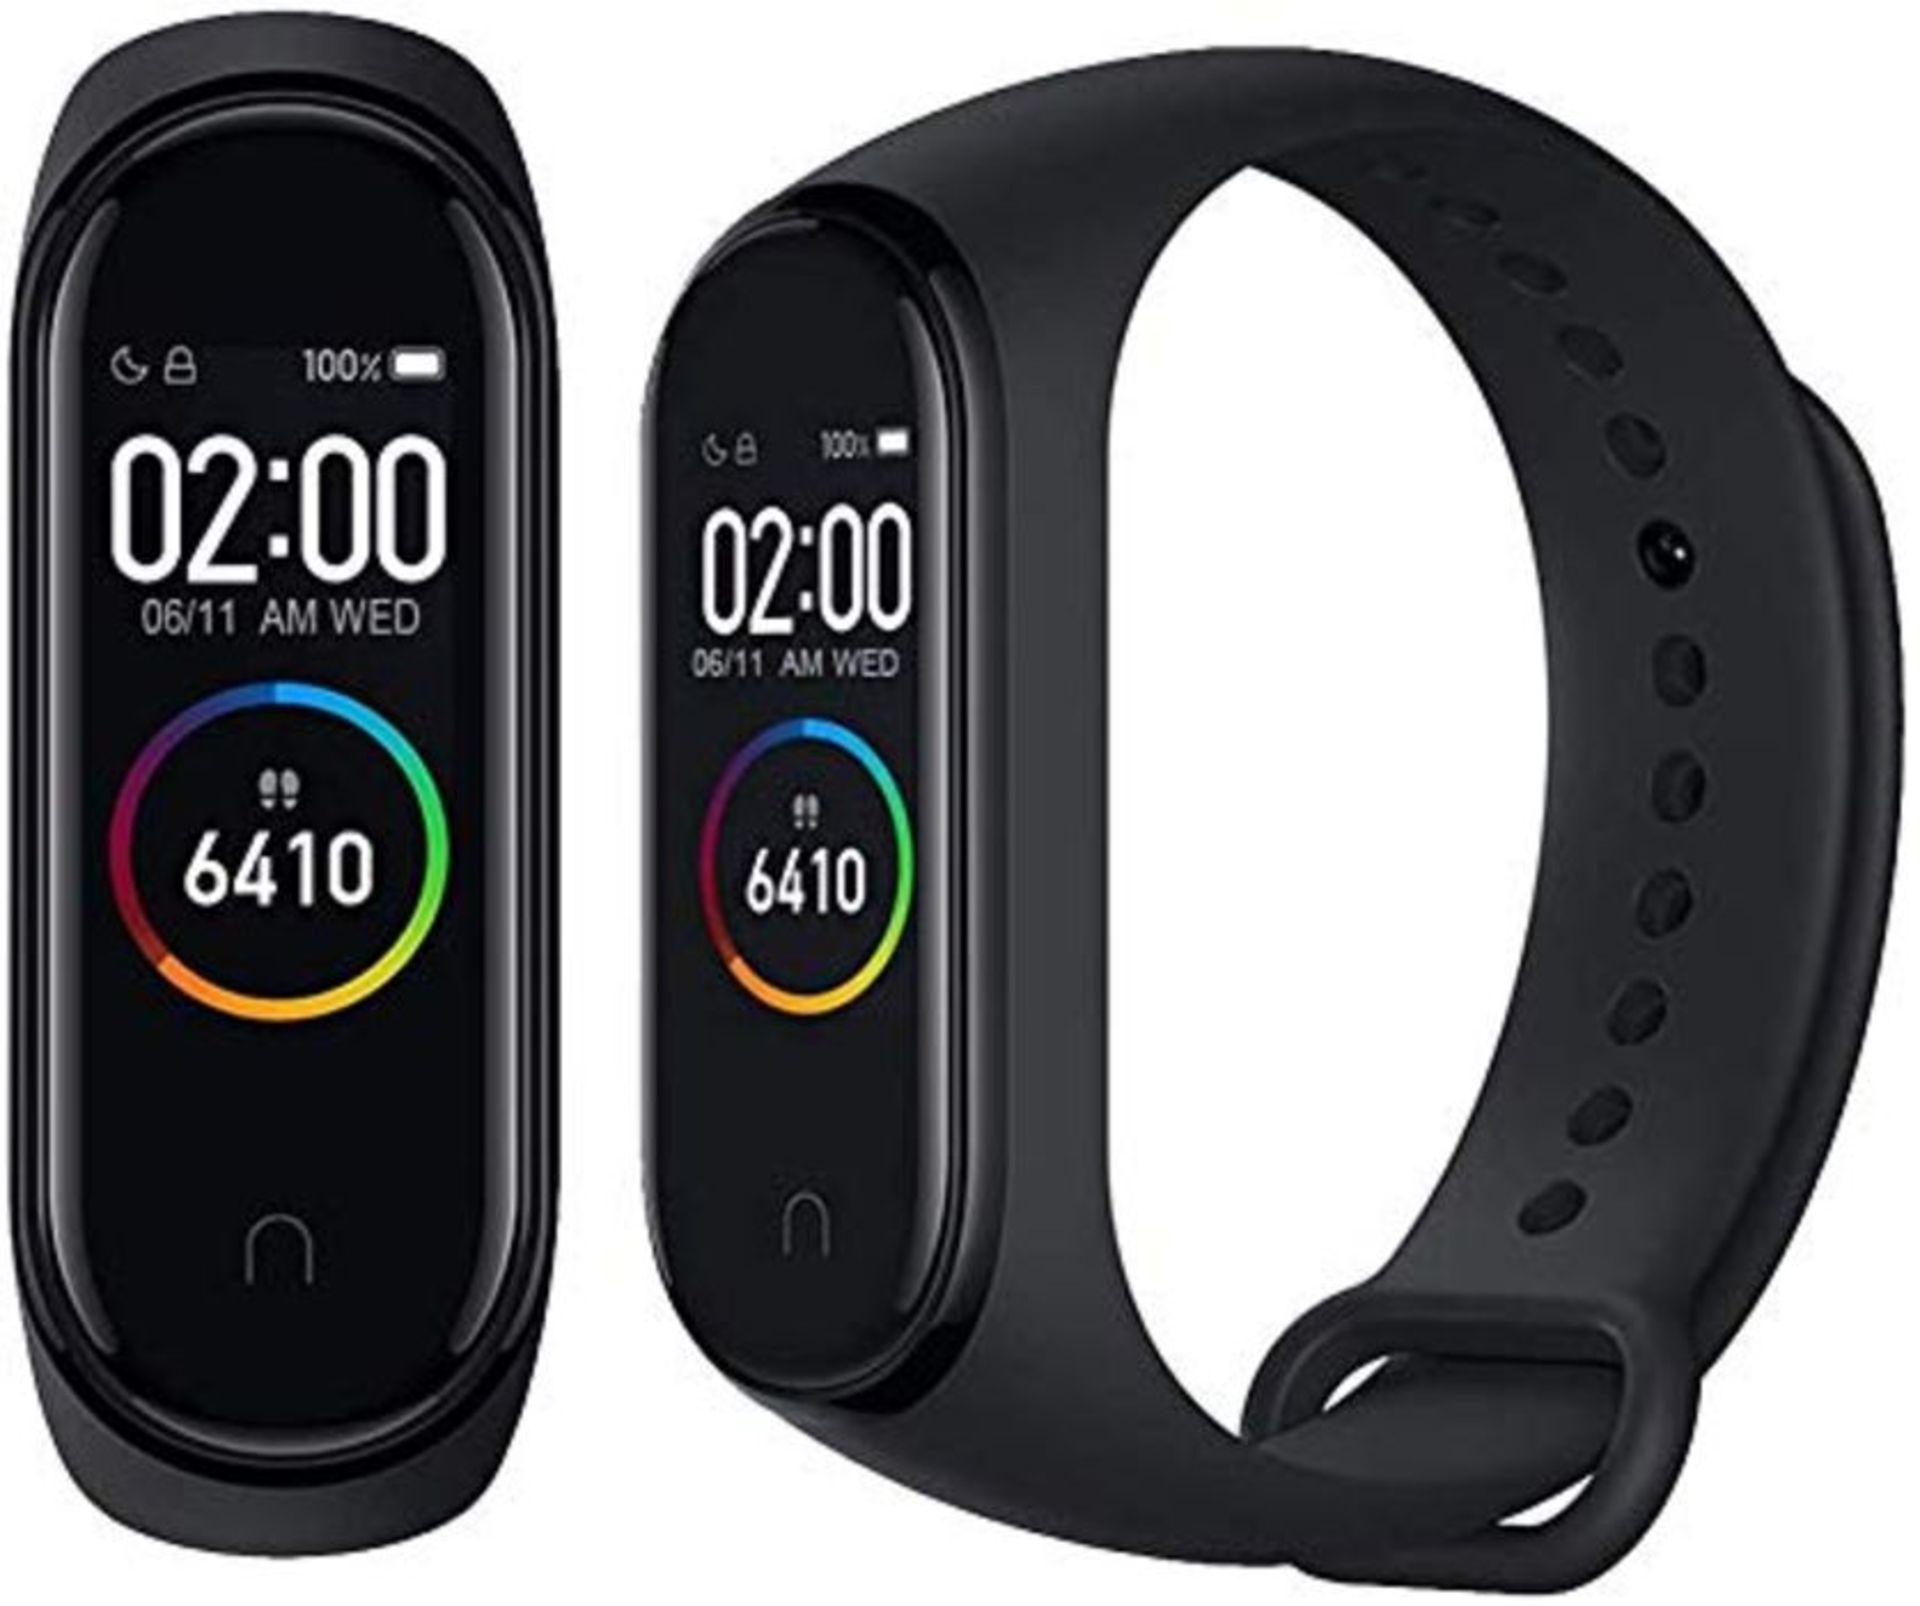 Xiaomi Mi Band 4 Fitness Tracker, 0.95 Inches, Colour, AMOLED Display, Heart Rate Moni